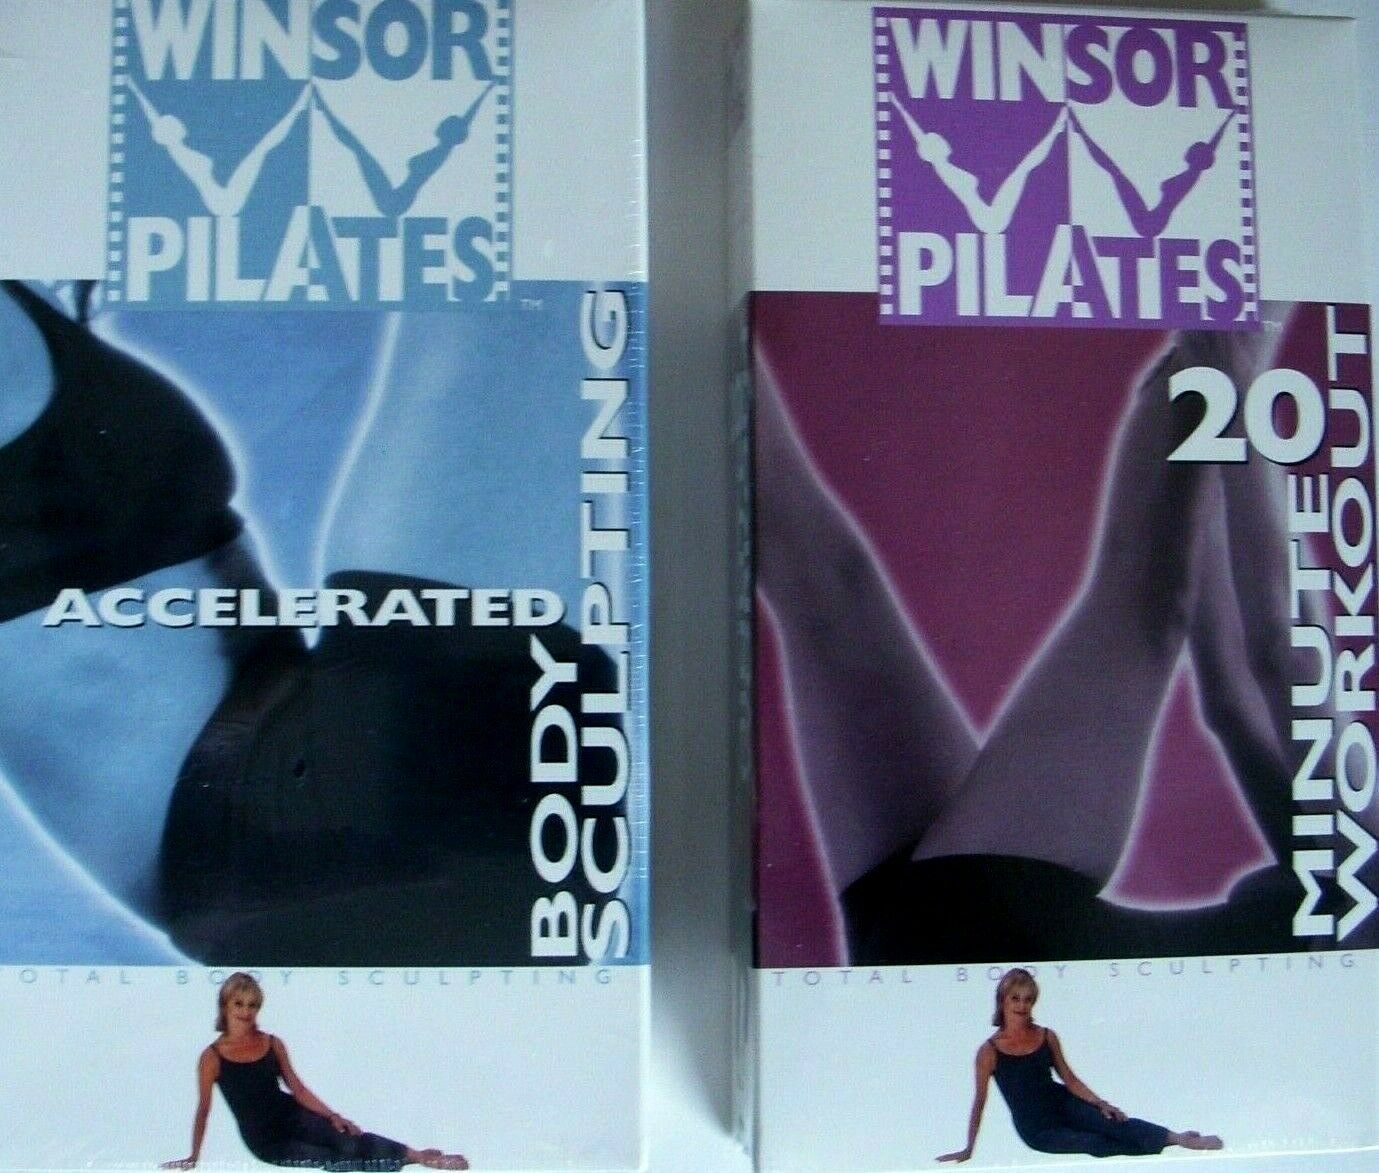 Pilates Body Sculpting 20 Min Workout VHS Winsor Vintage Exercise Fitness NEW - $15.00